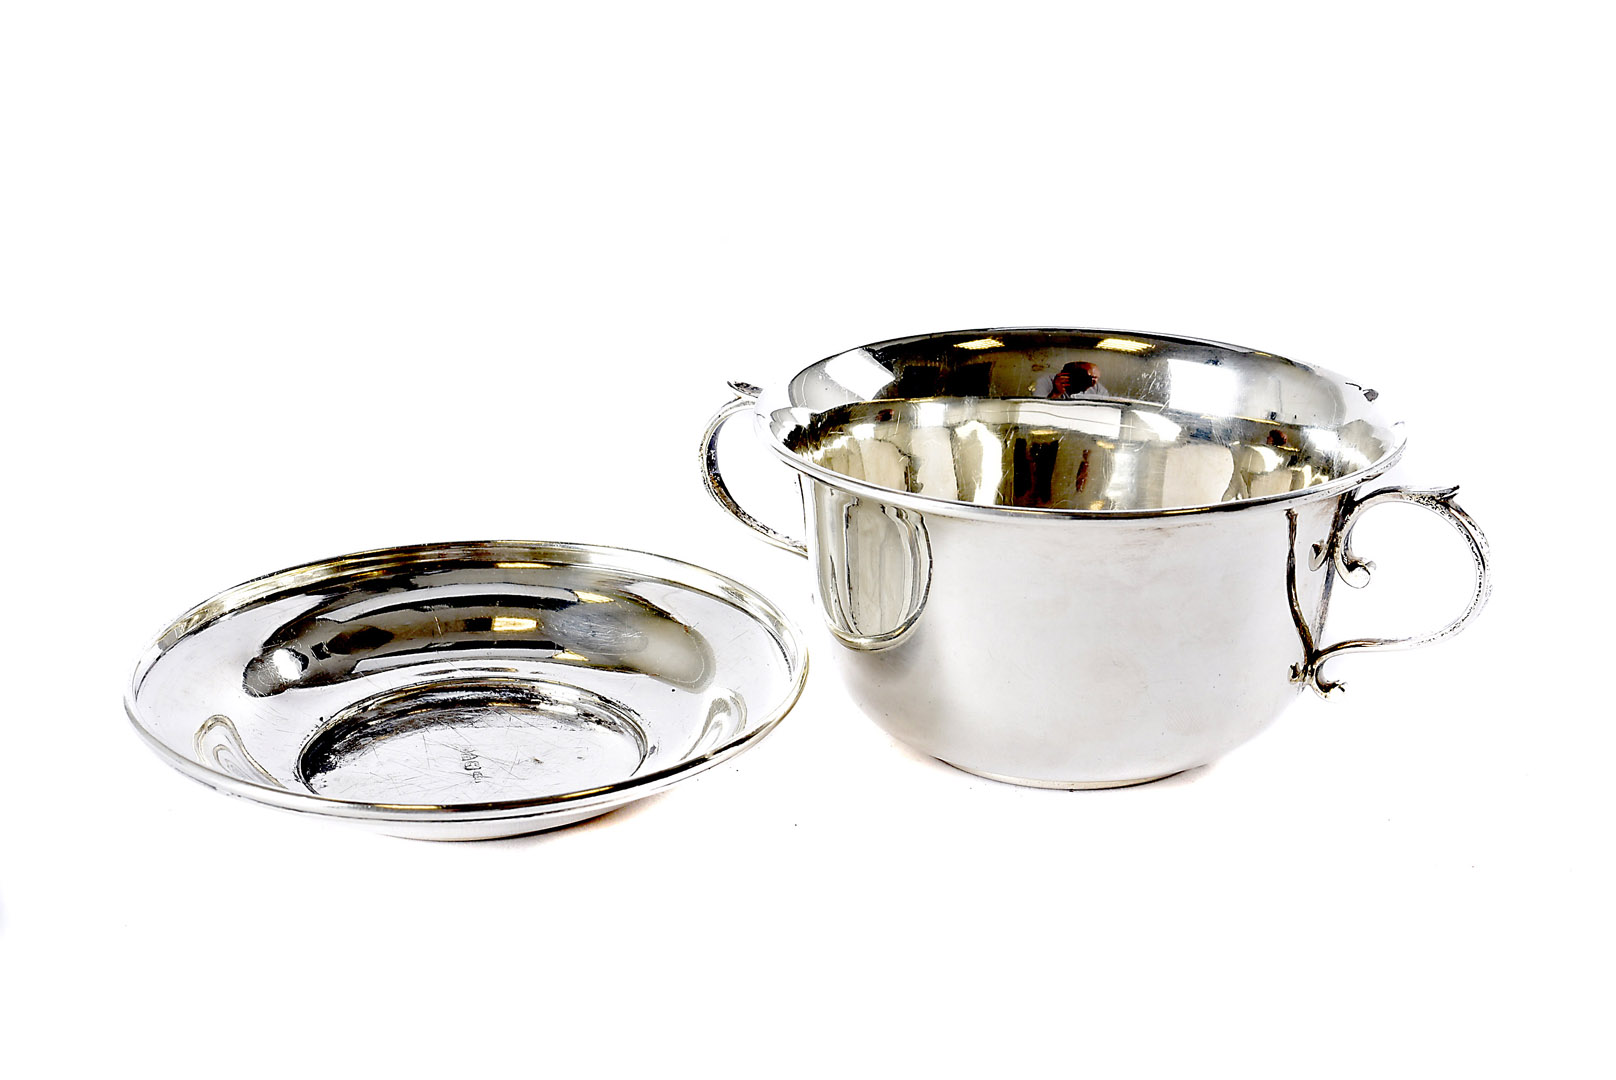 A 1930s silver porringer and cover by C.P & Co, engraved Peter to twin handled cup (2) somewhat